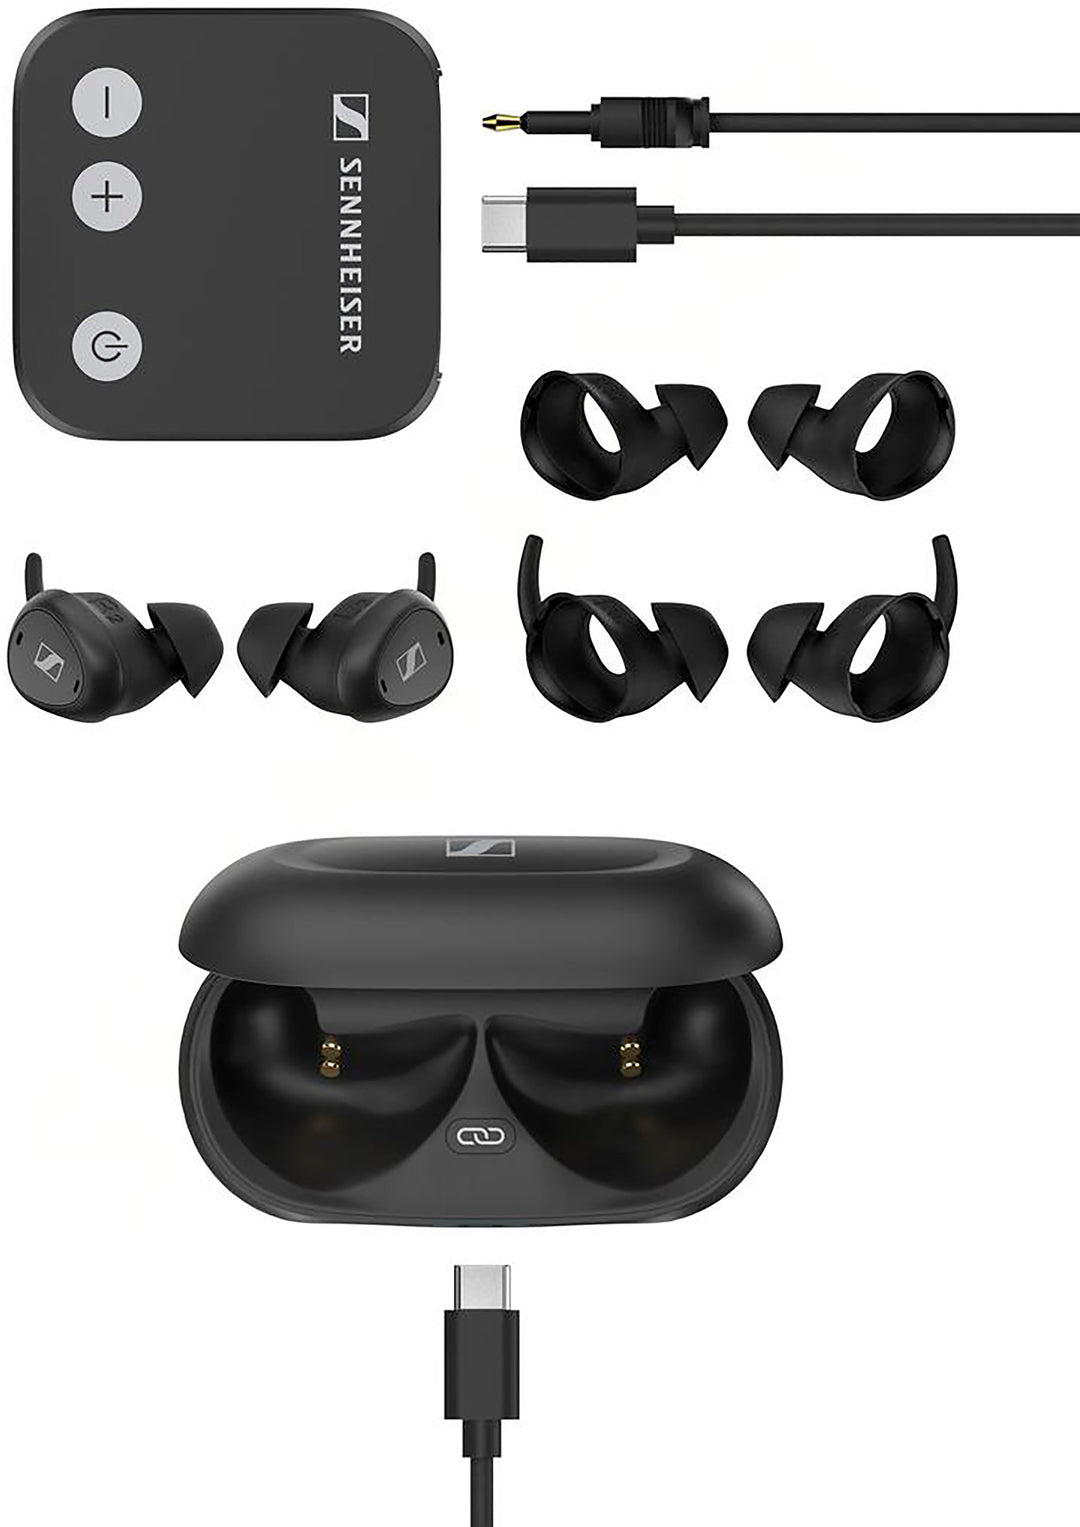 Sennheiser - TV Clear Set 2 - True Wireless In-Ear Advanced TV listening With 5 Speech Clarity Levels And TV Connector - Black_12